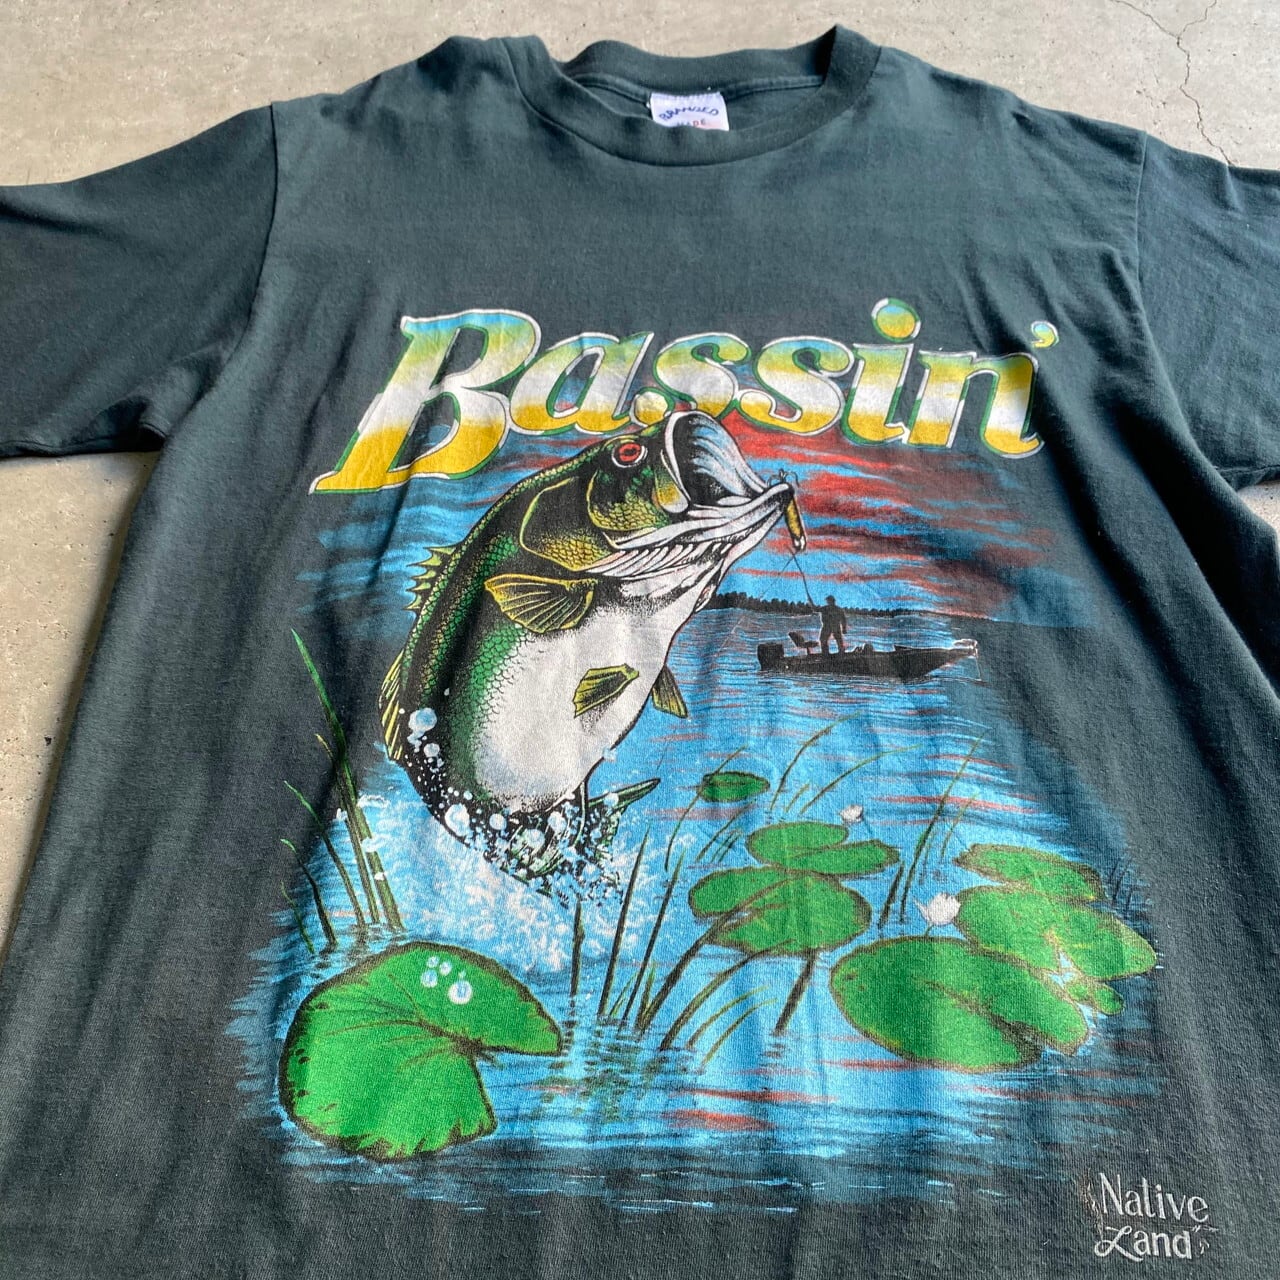 USA製 90年代 ブラックバス 魚 フィッシング プリント Tシャツ メンズM 古着 90s ヴィンテージ ビンテージ 緑  グリーン【Tシャツ】【SS2207-30】 | cave 古着屋【公式】古着通販サイト powered by BASE